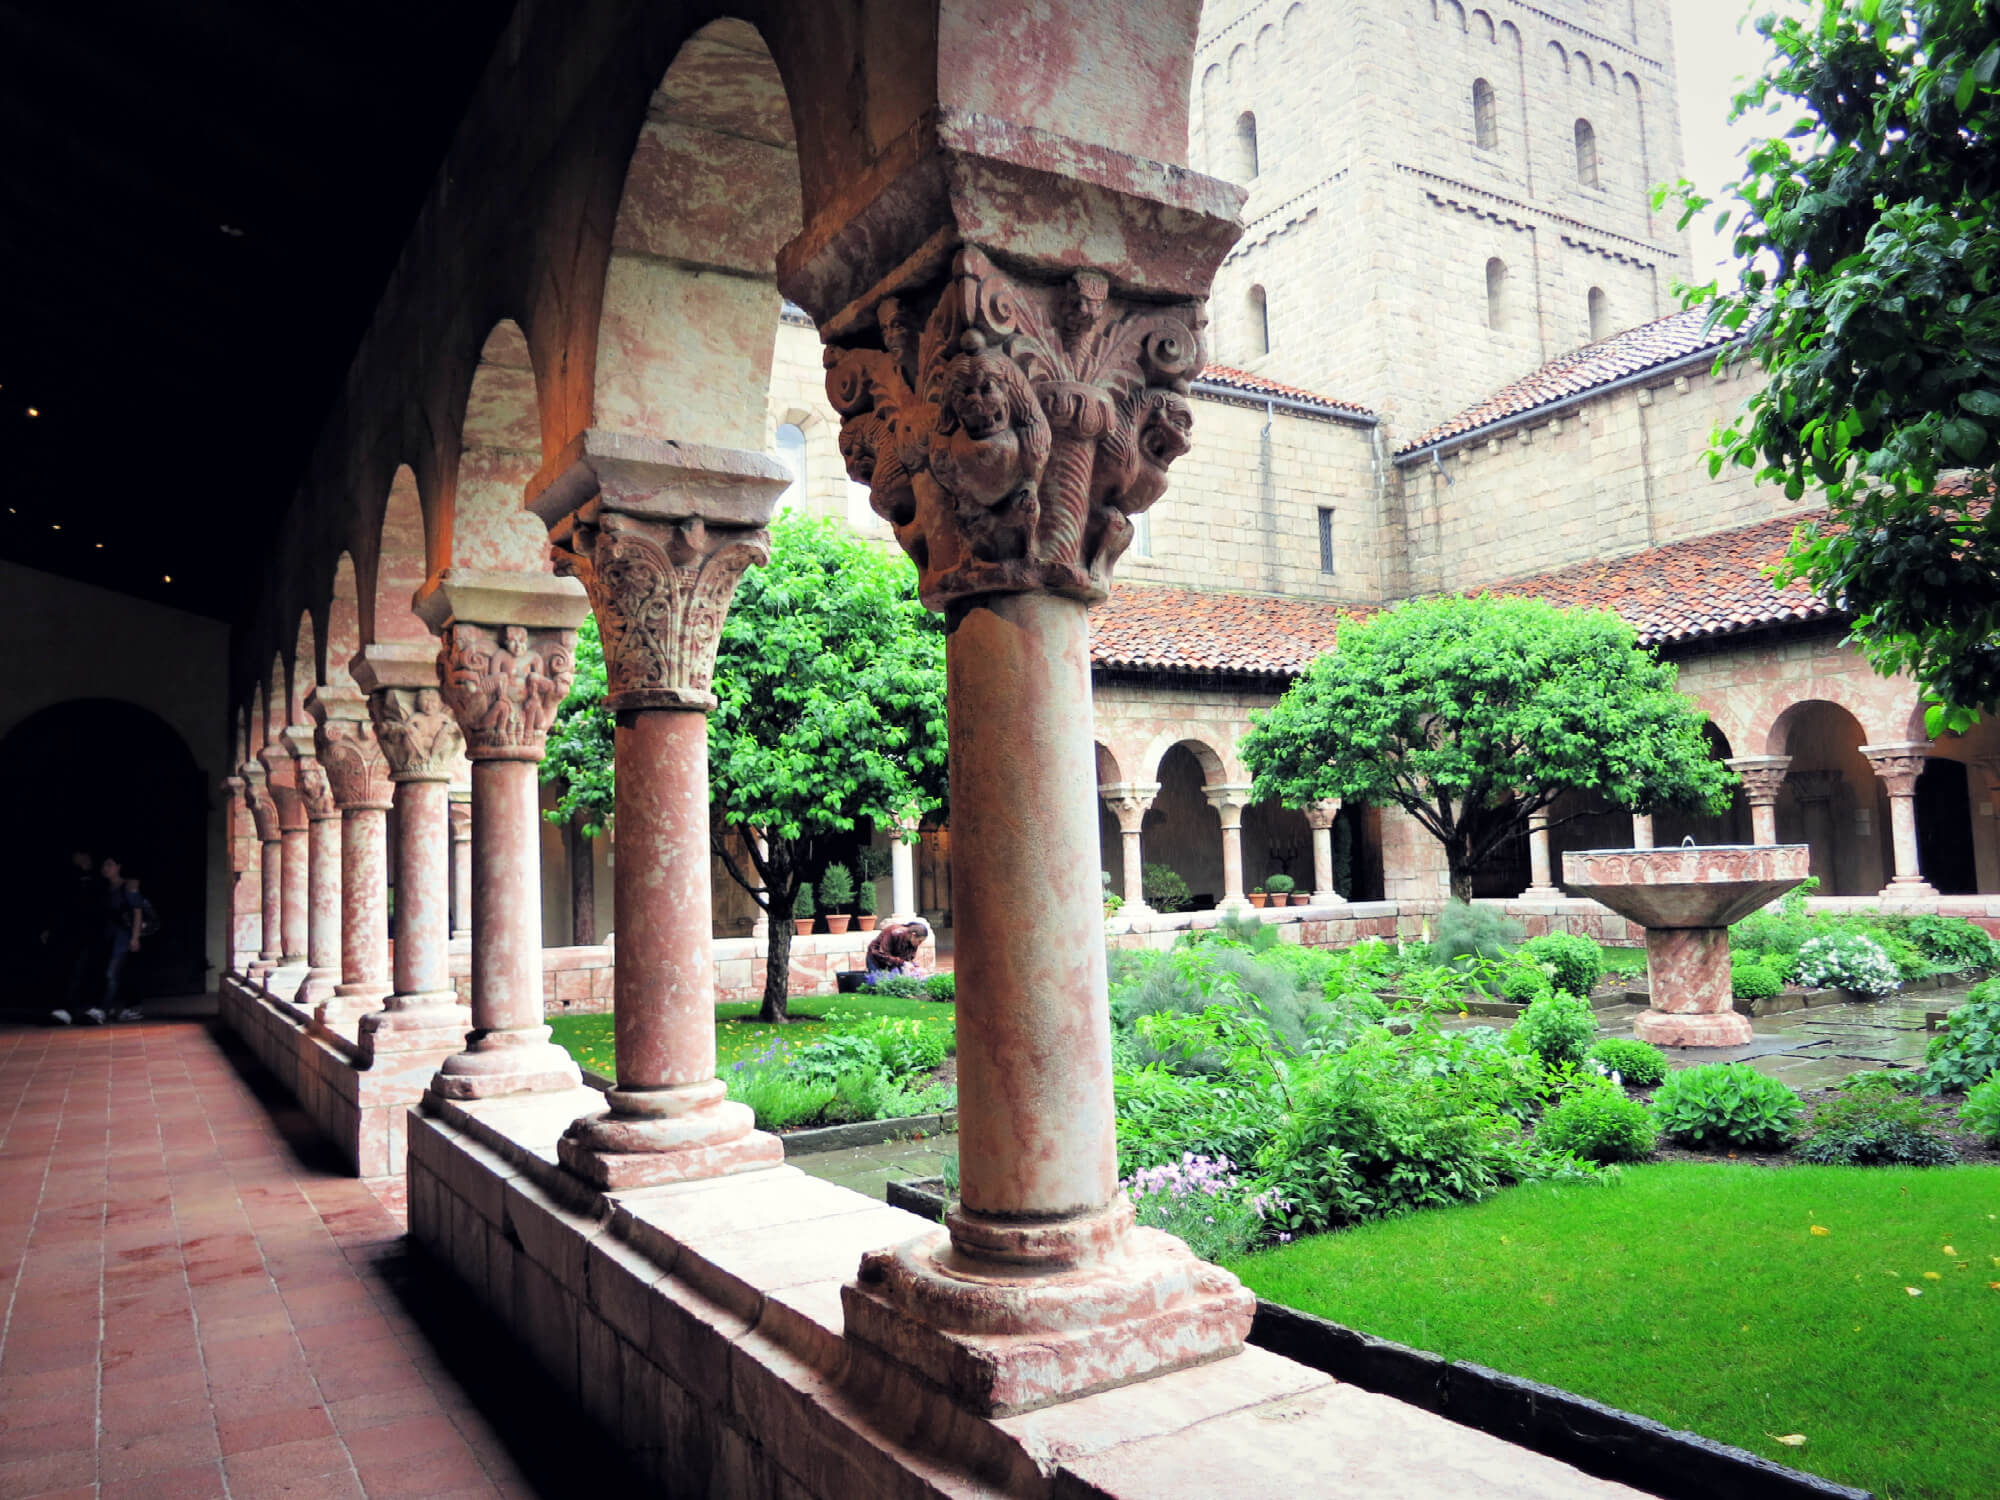 The Cloisters in NYC